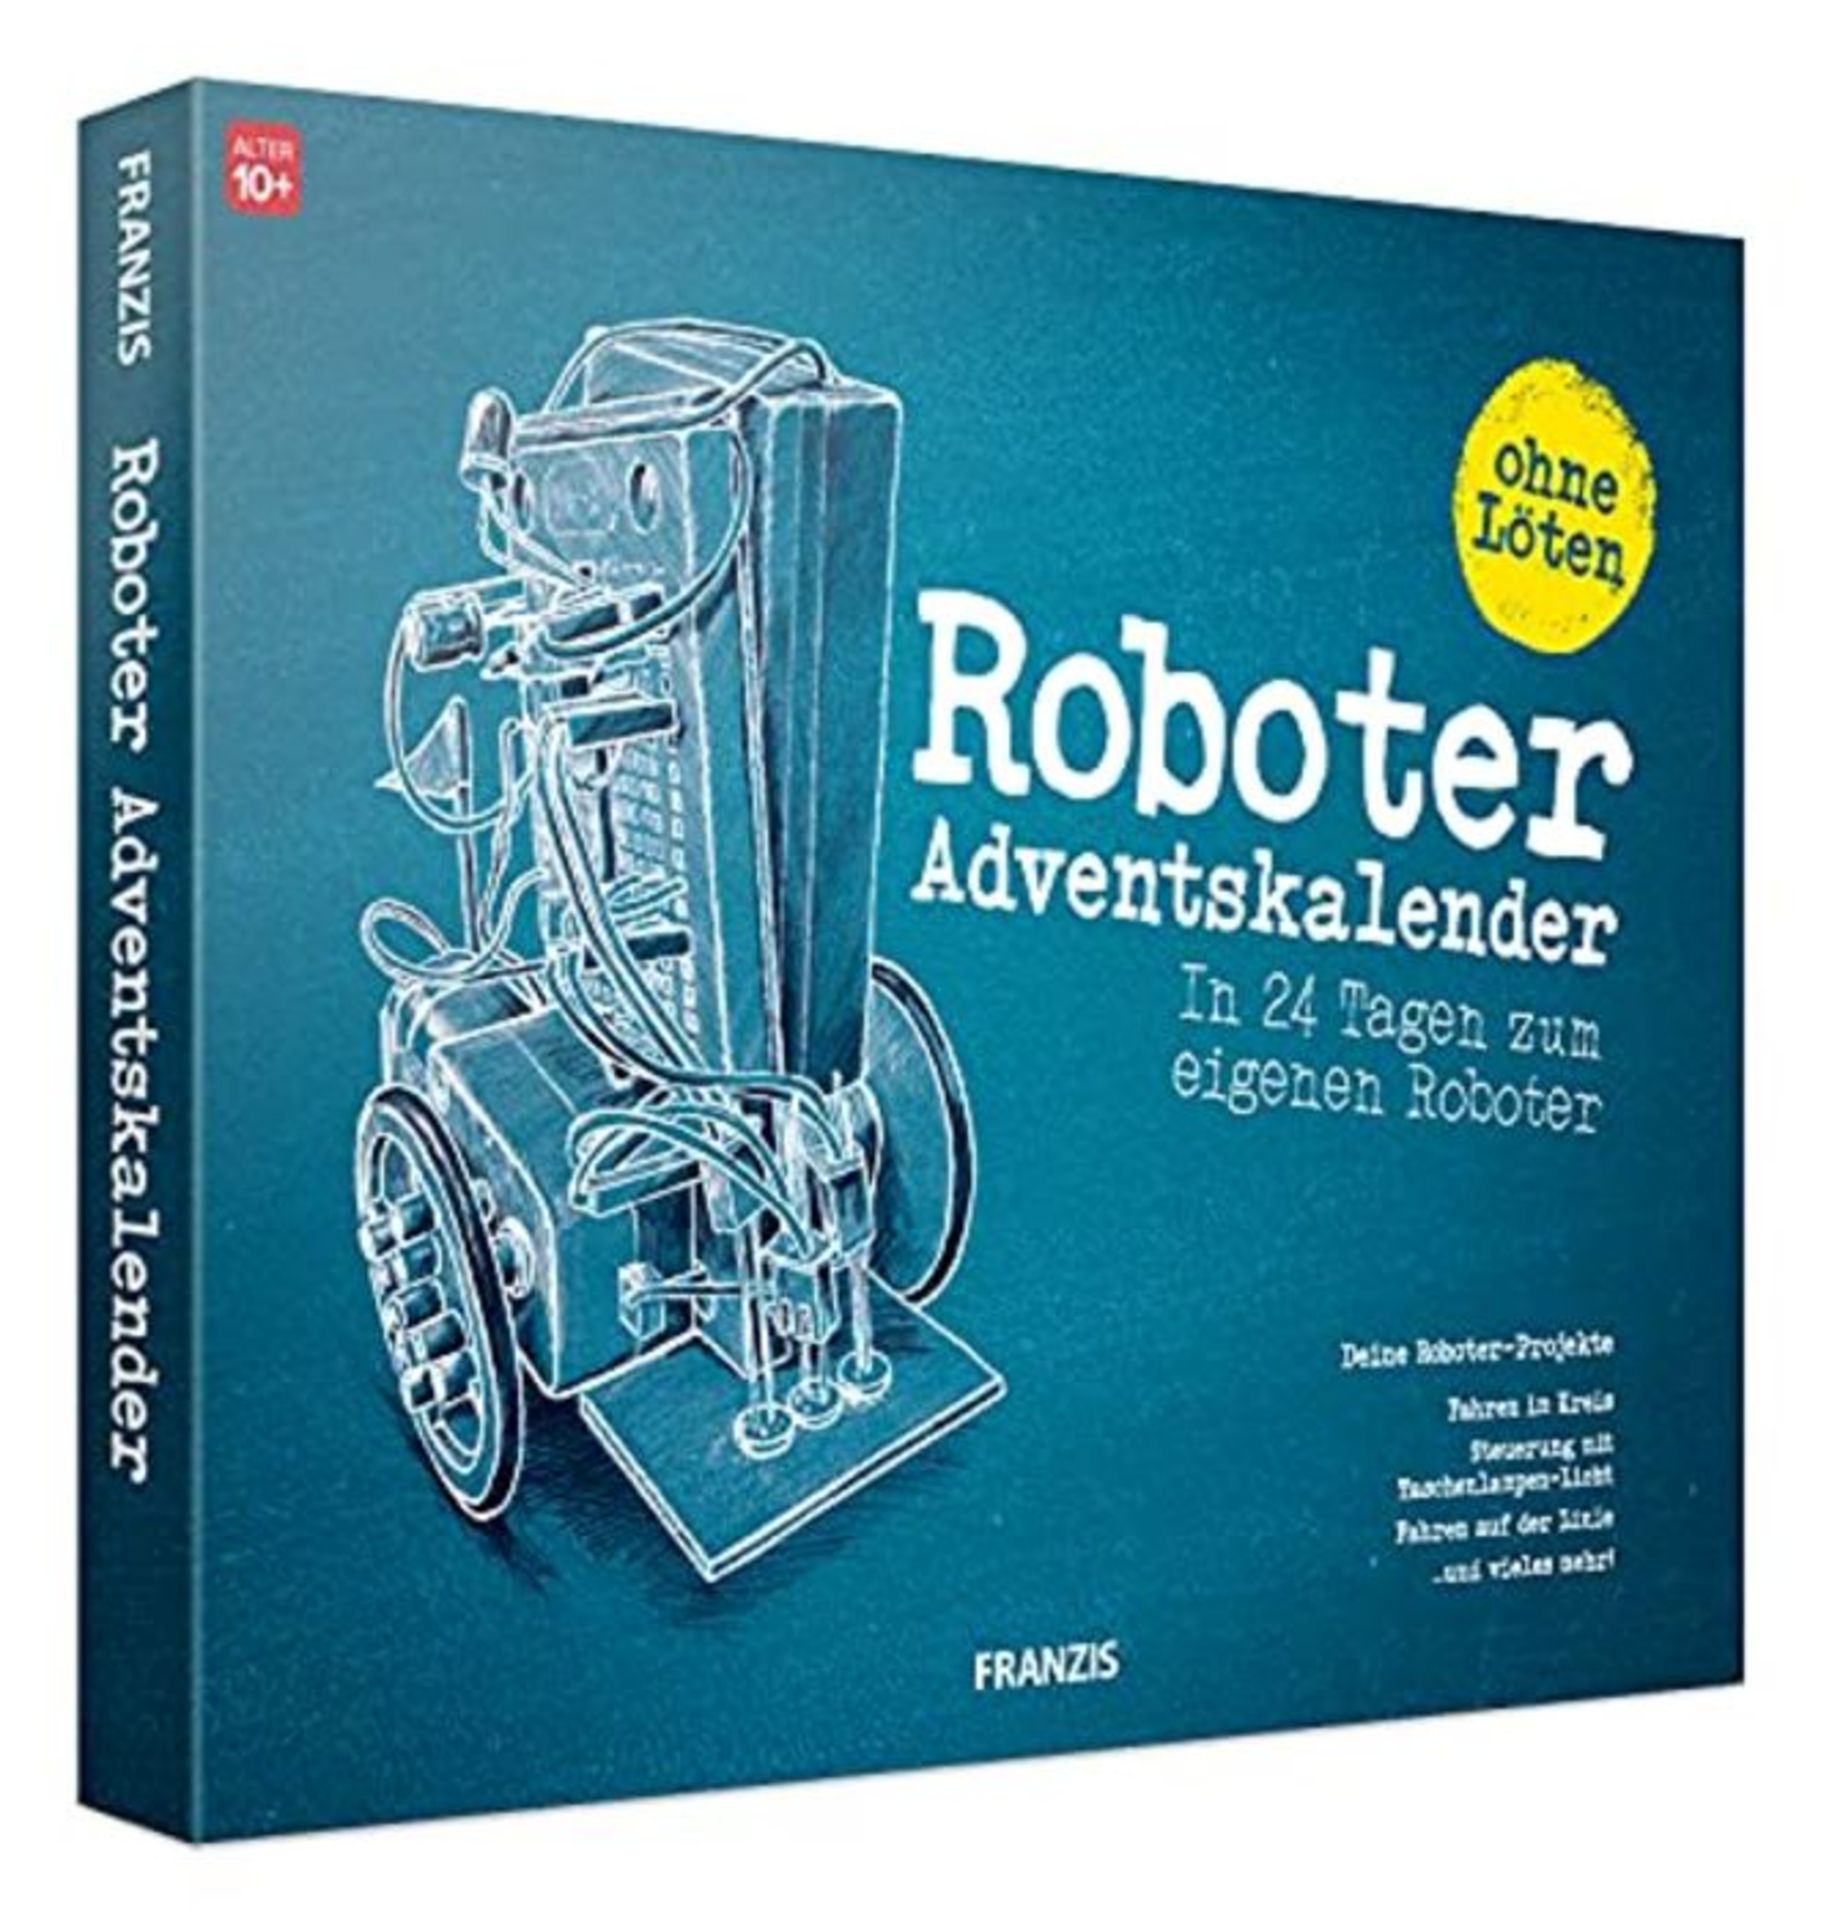 Franzis 67161-5 Advent Calendar - for Your Own Robot in 24 Days for Children from 12 Y